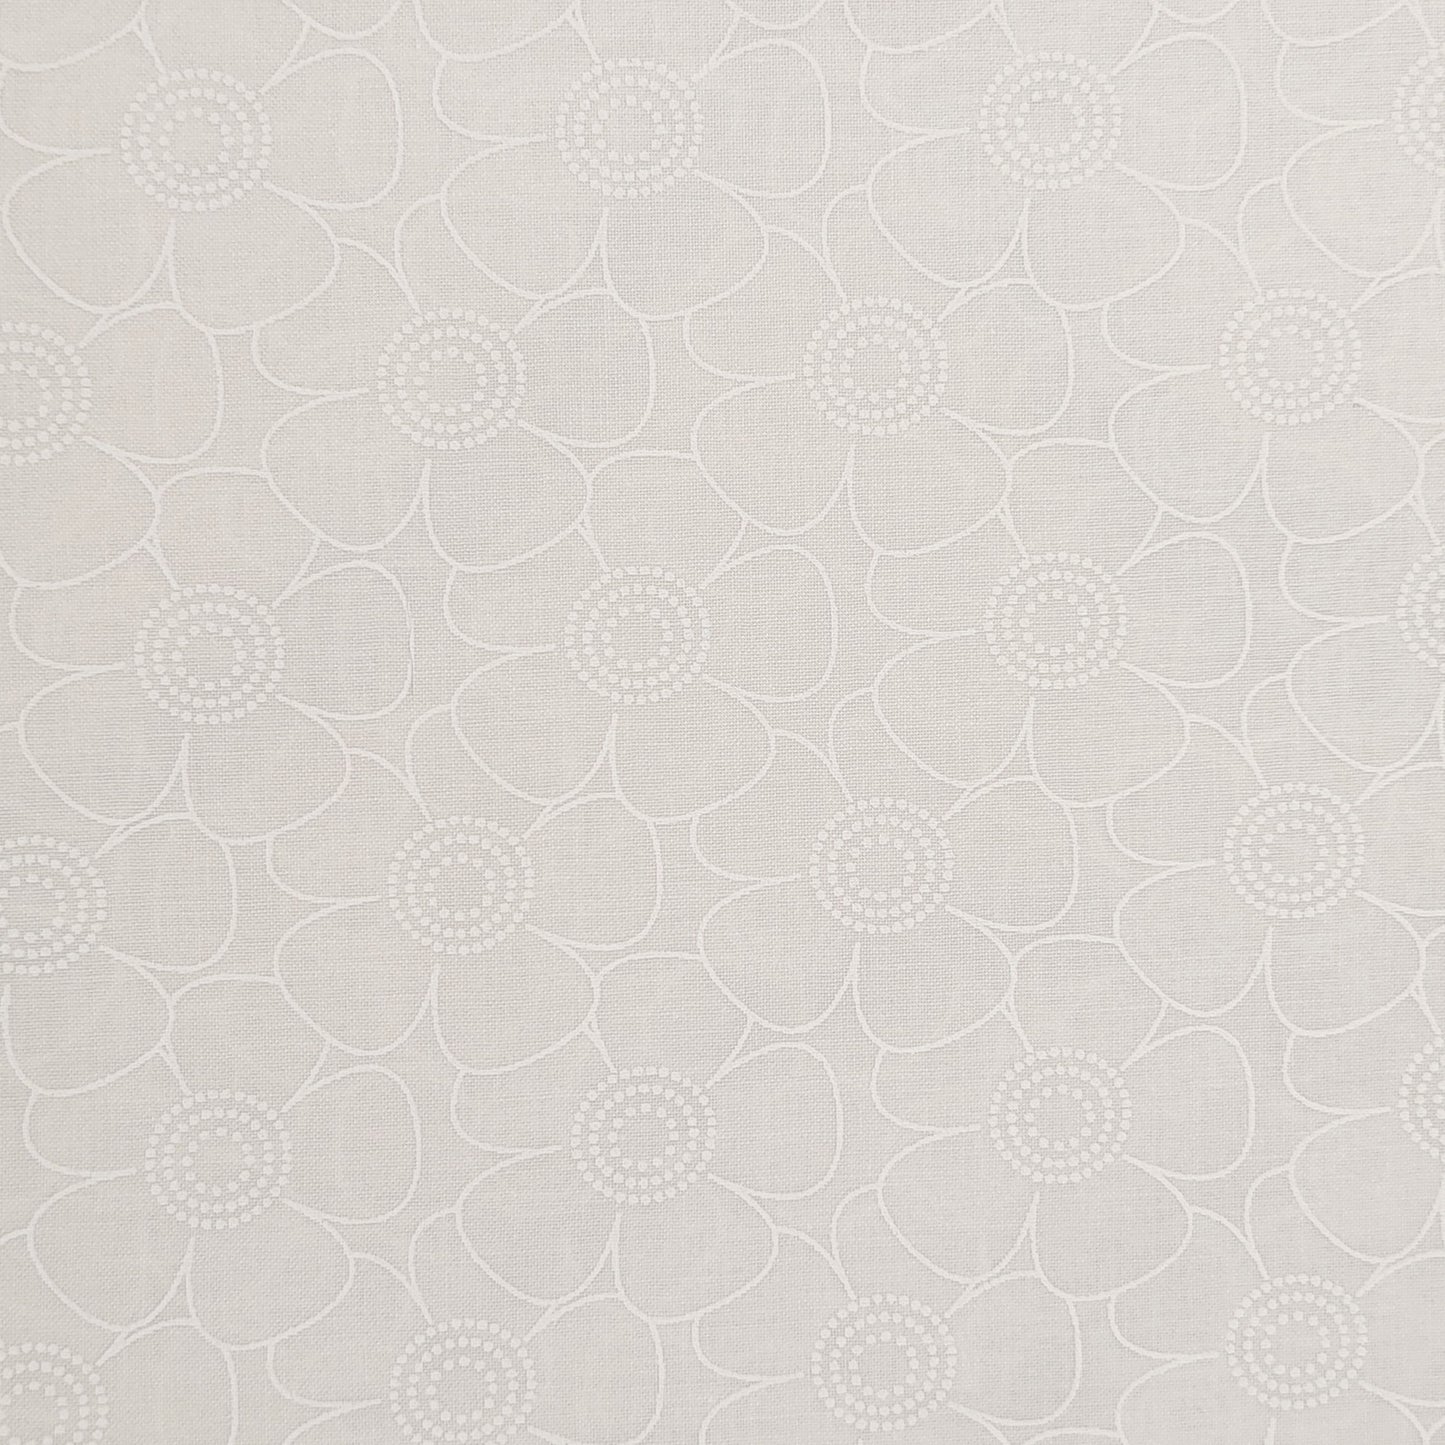 Harmony Prints - White on White - 1250-141 in Floral